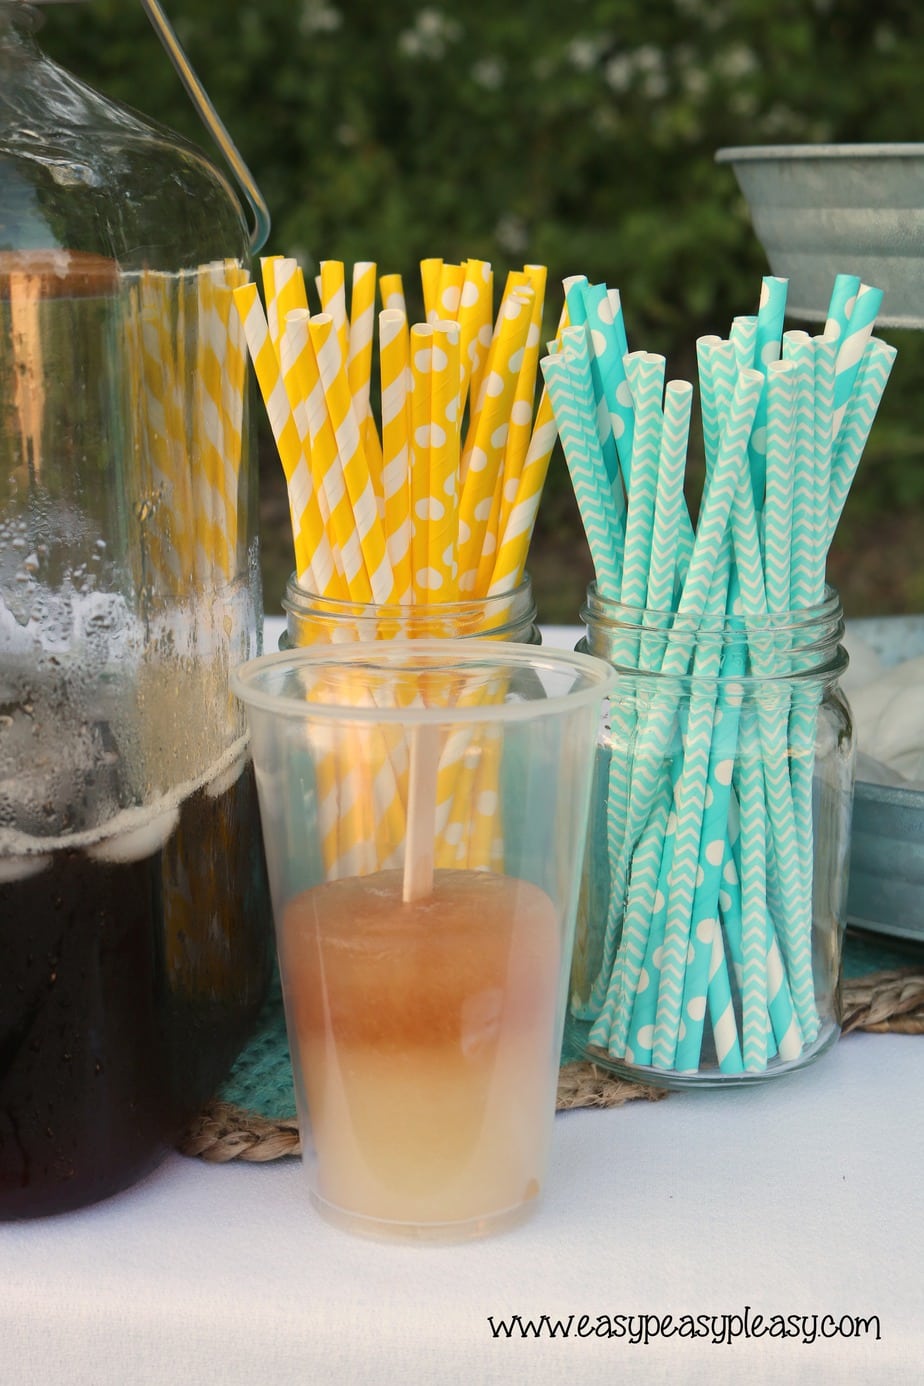 The kids came up with a fun idea to do with their homemade popsicles. Check out how they elevate these Arnold Palmer Popsicles.